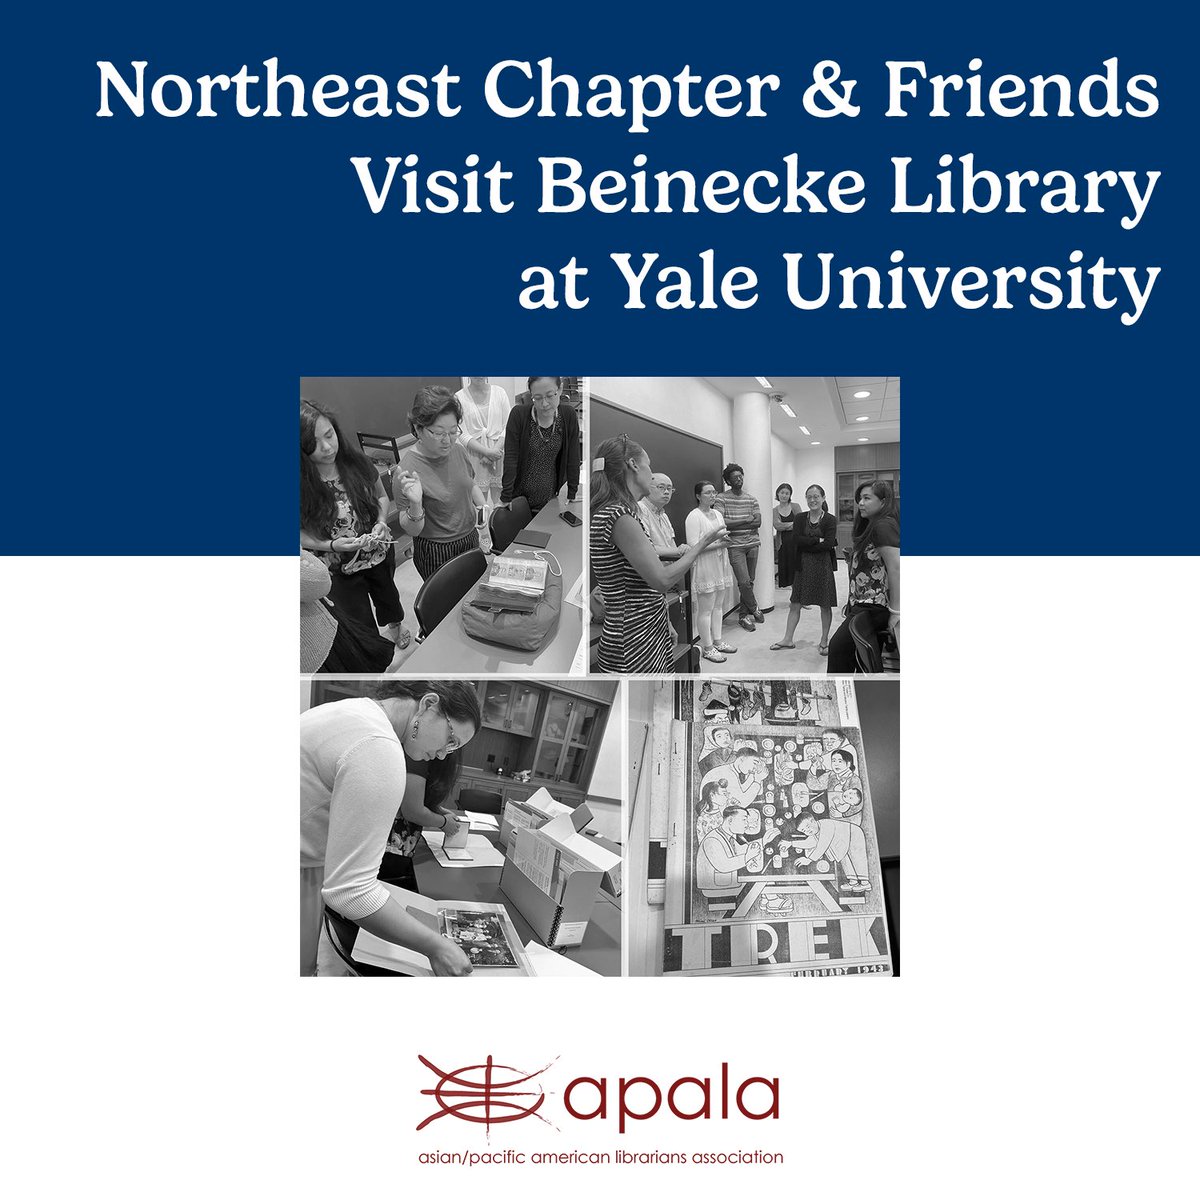 New post on the website! Read about APALA Northeast Chapter members visit to Beinecke Library at Yale University. 10 library professionals frm 4 states visited exhibits, libraries, AAPI collections & met w/ colleagues on a day-long field trip. Read more: apalaweb.org/ne-chapter-fri…